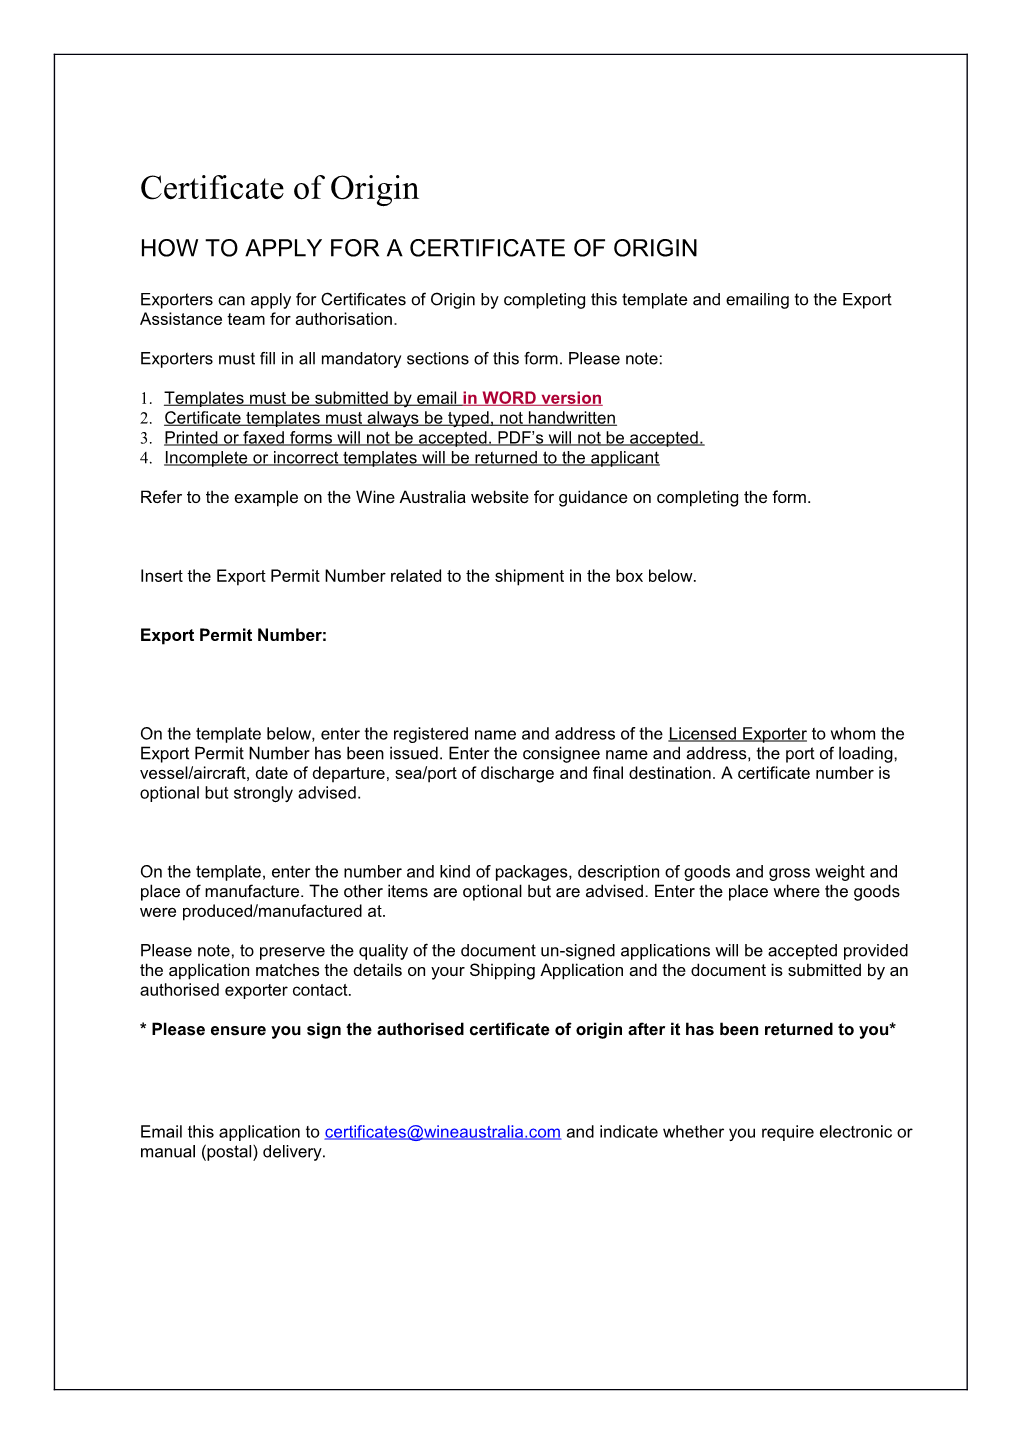 How to Apply for a Certificate of Origin